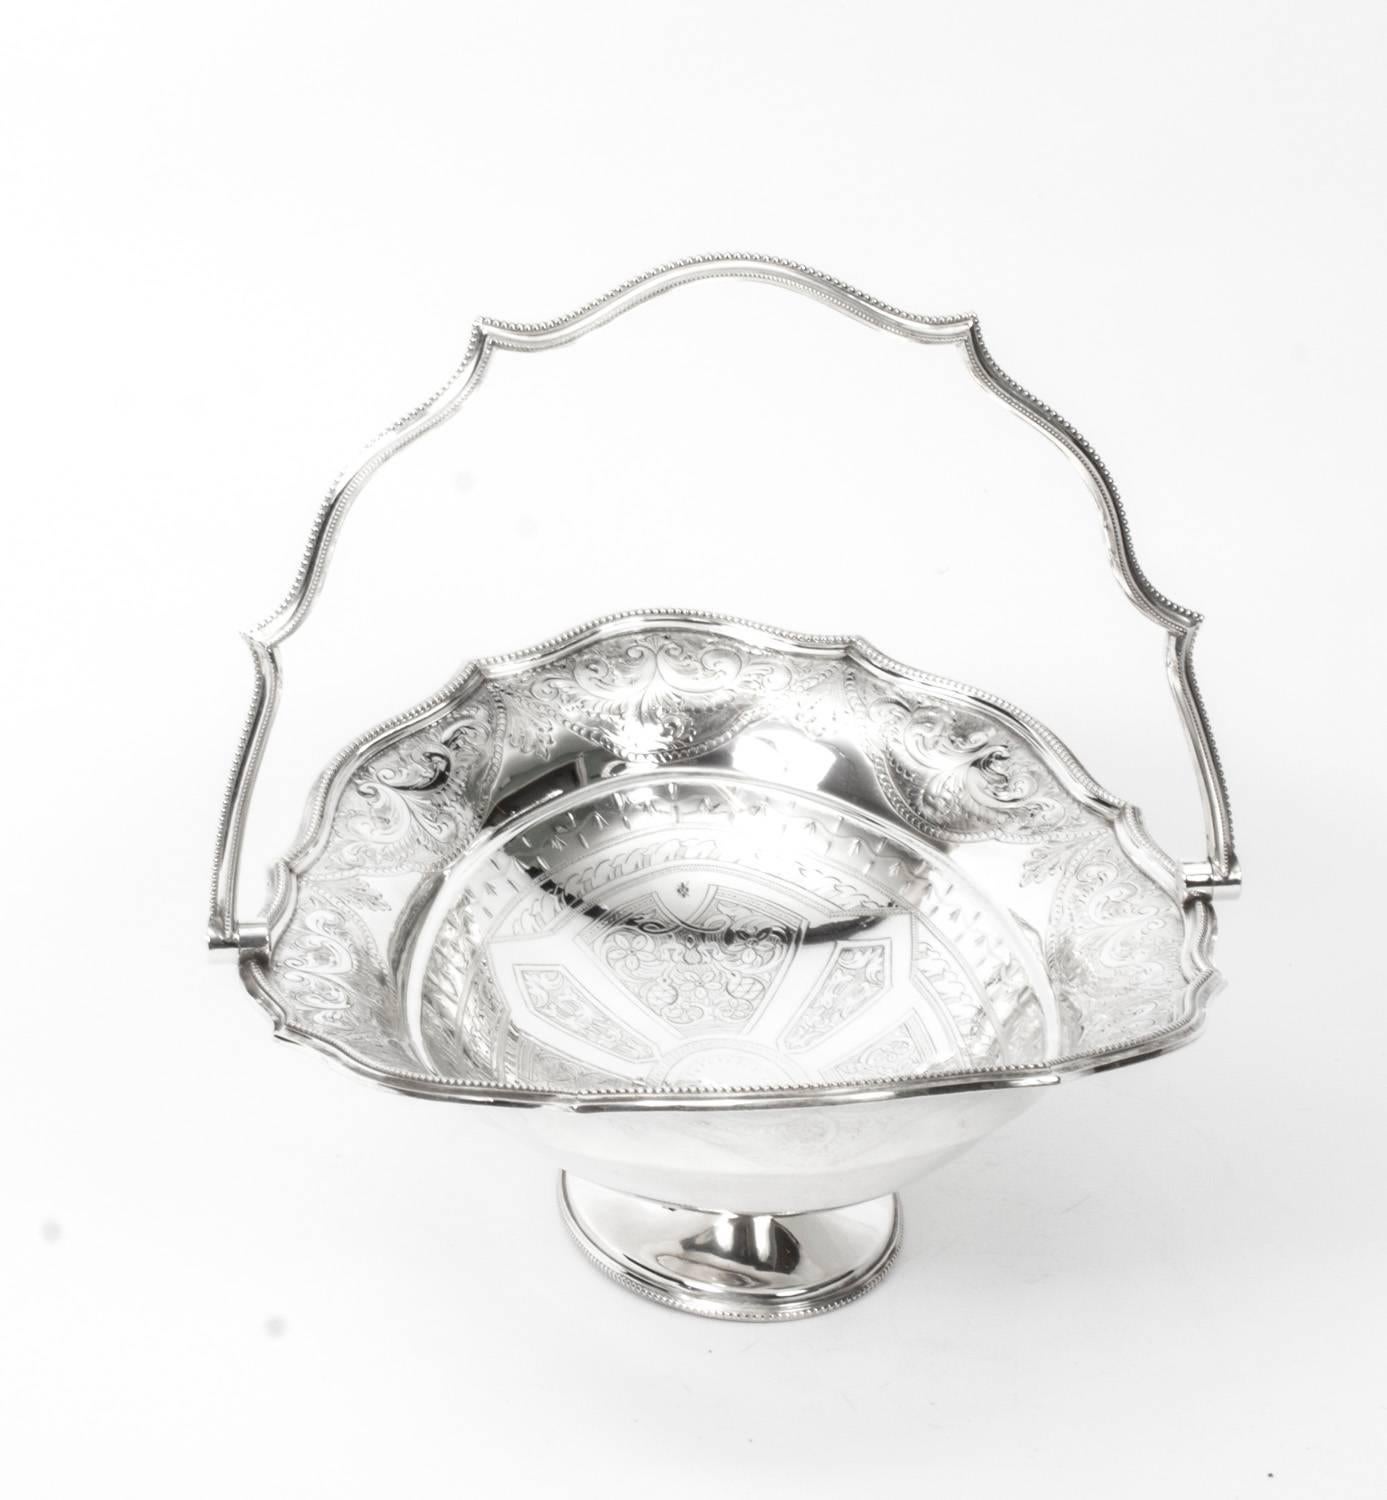 This is a stunning English Victorian silver plated fruit or bread basket with fabulous engraved decoration, circa 1880 in date.

It bears the makers mark of the silversmith W.C.Griffiths of Birmingham.

Add a touch of class to your next dining